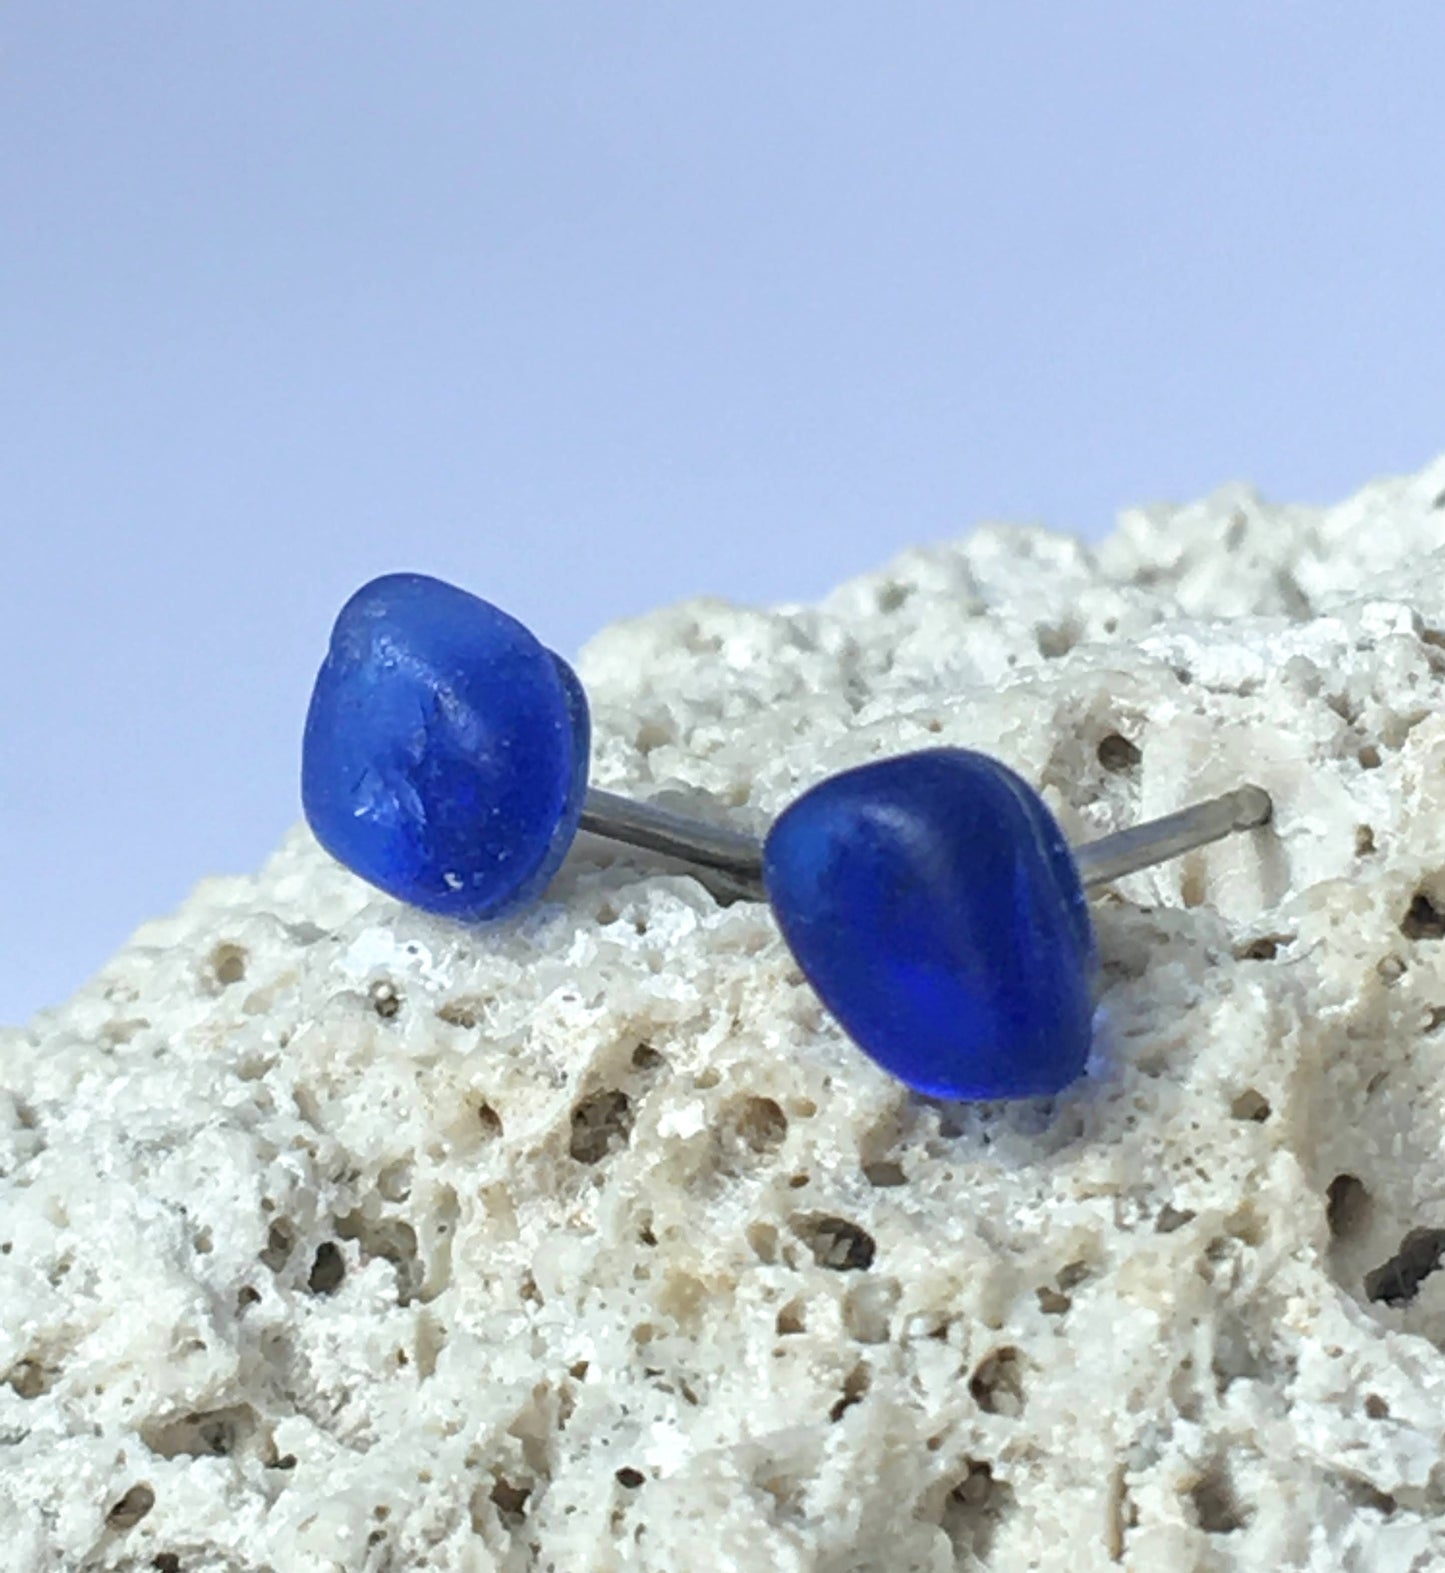 Pebble Stud Earrings - Cobalt blue sea glass from Cape Breton, Nova Scotia, Canada on surgical steel posts with butterfly clutch